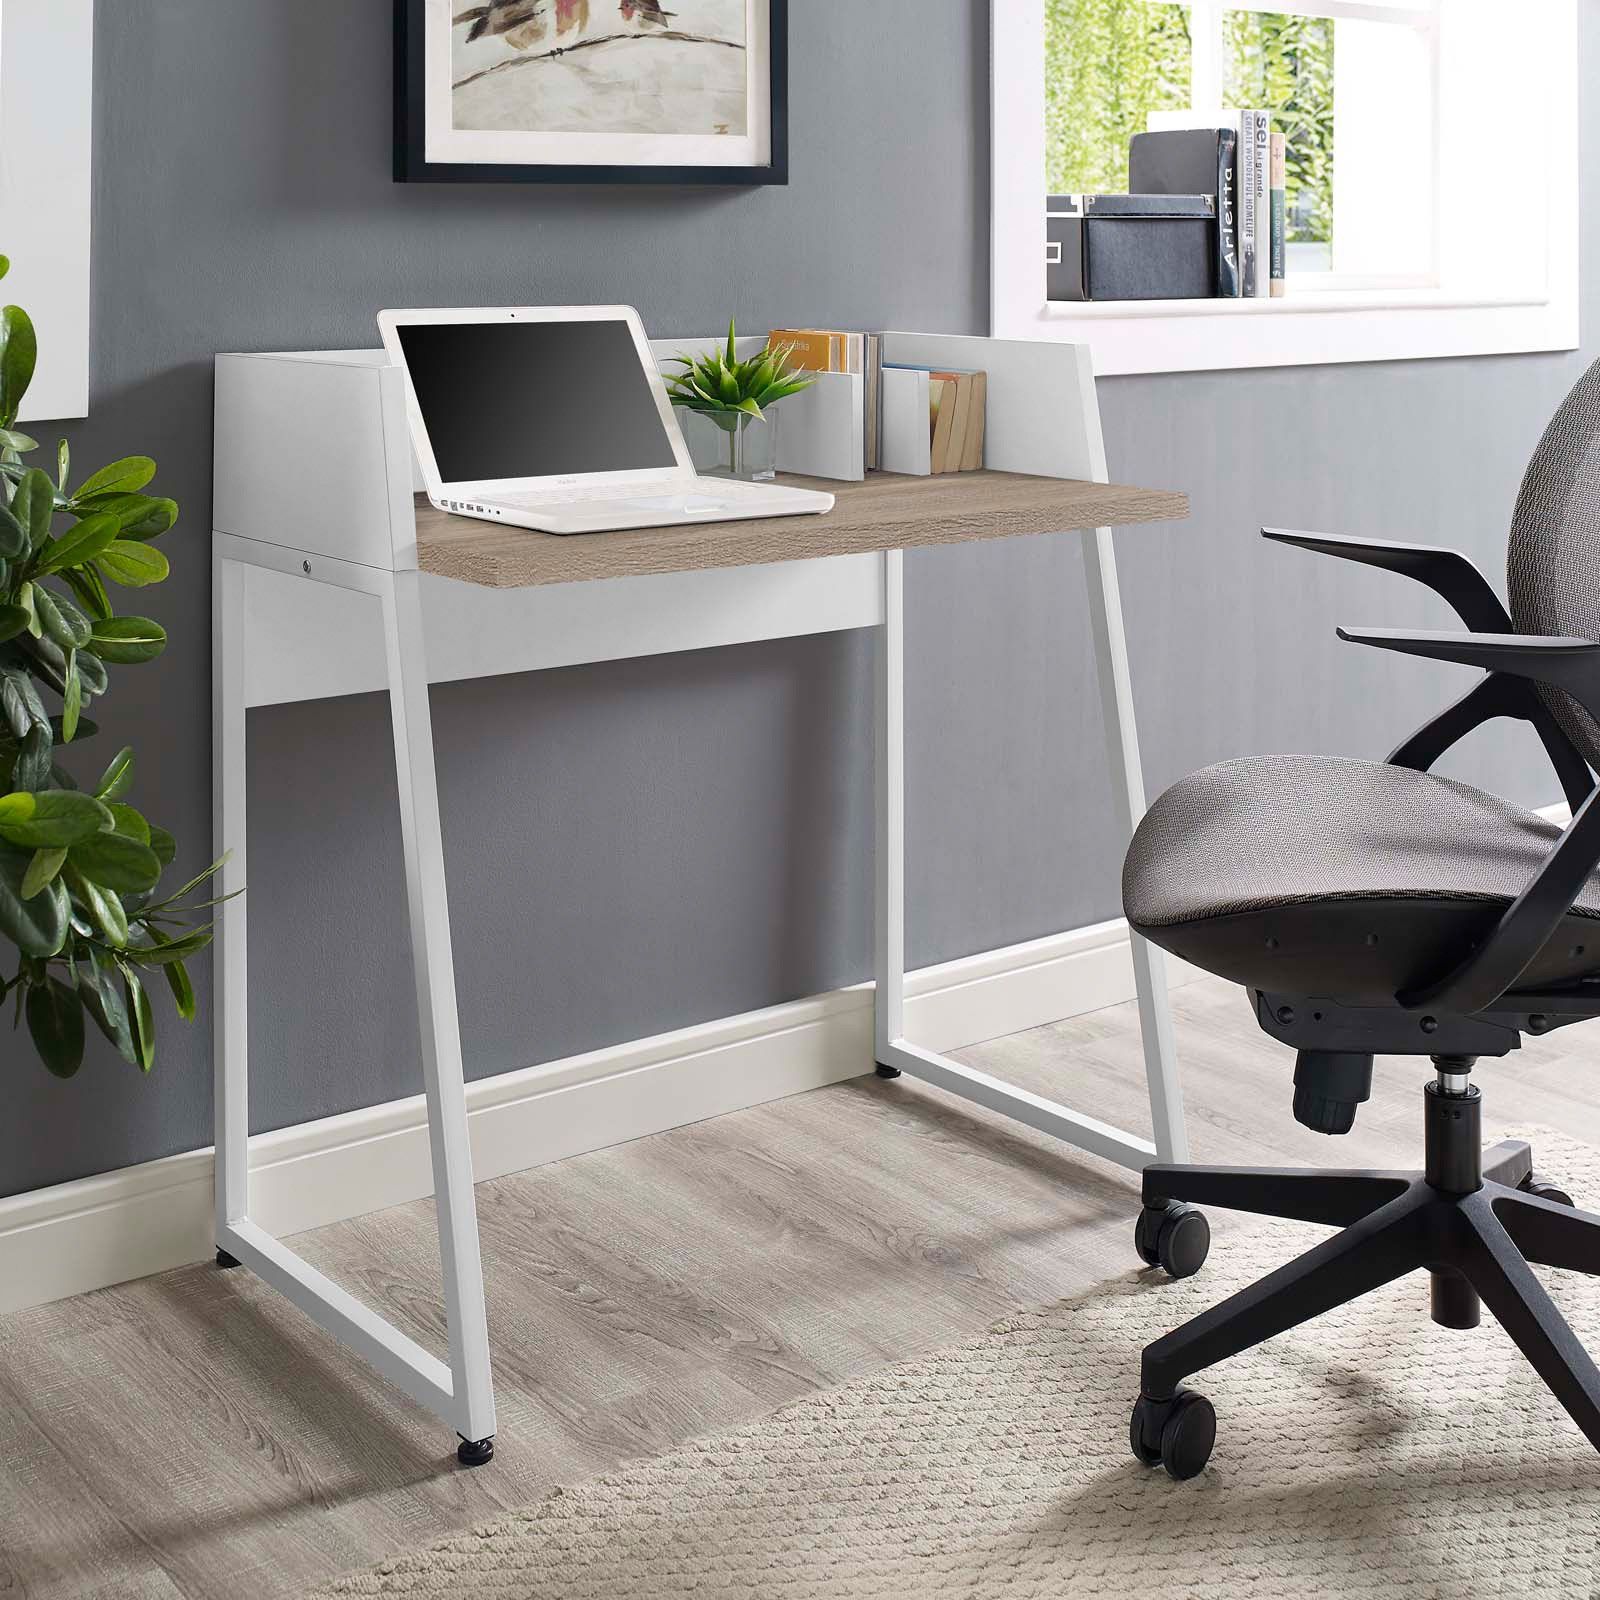 Modway Relay Wood Writing Desk In White Natural – Walmart – Walmart Inside White And Cement Writing Desks (View 3 of 15)